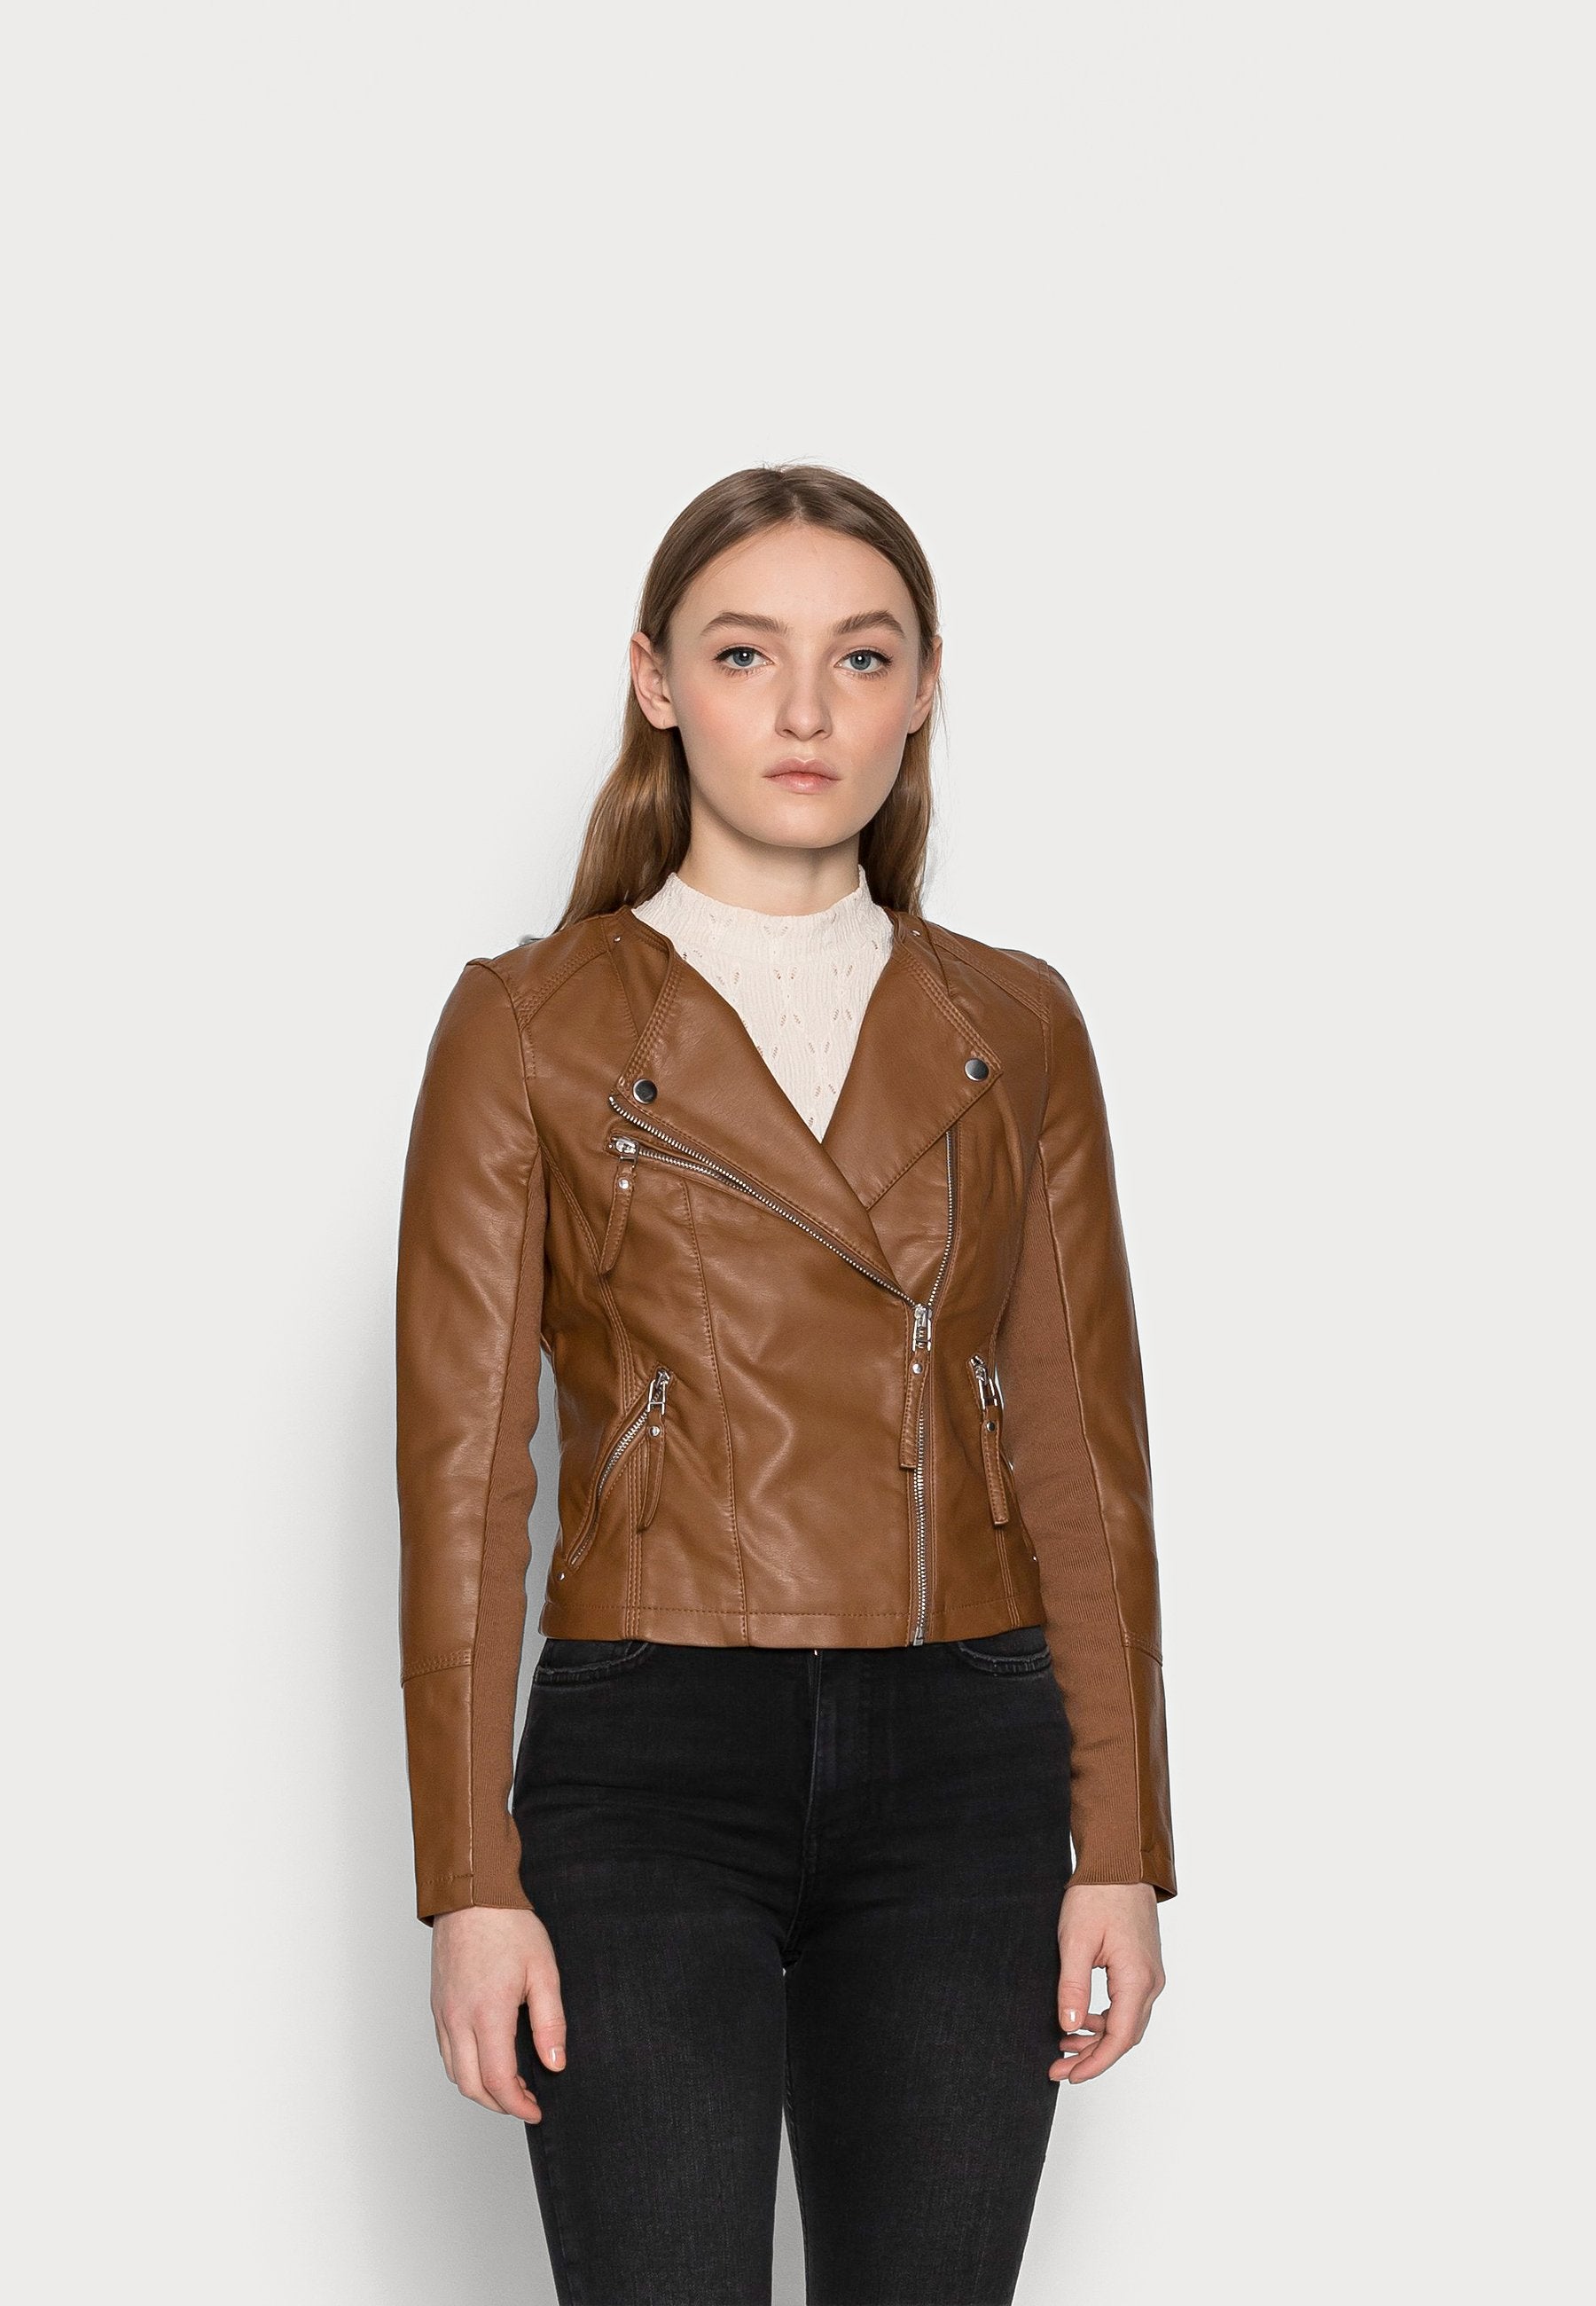 Buy SARA Women's Genuine Leather Jacket, Colour: Black-1028 (Small) at  Amazon.in